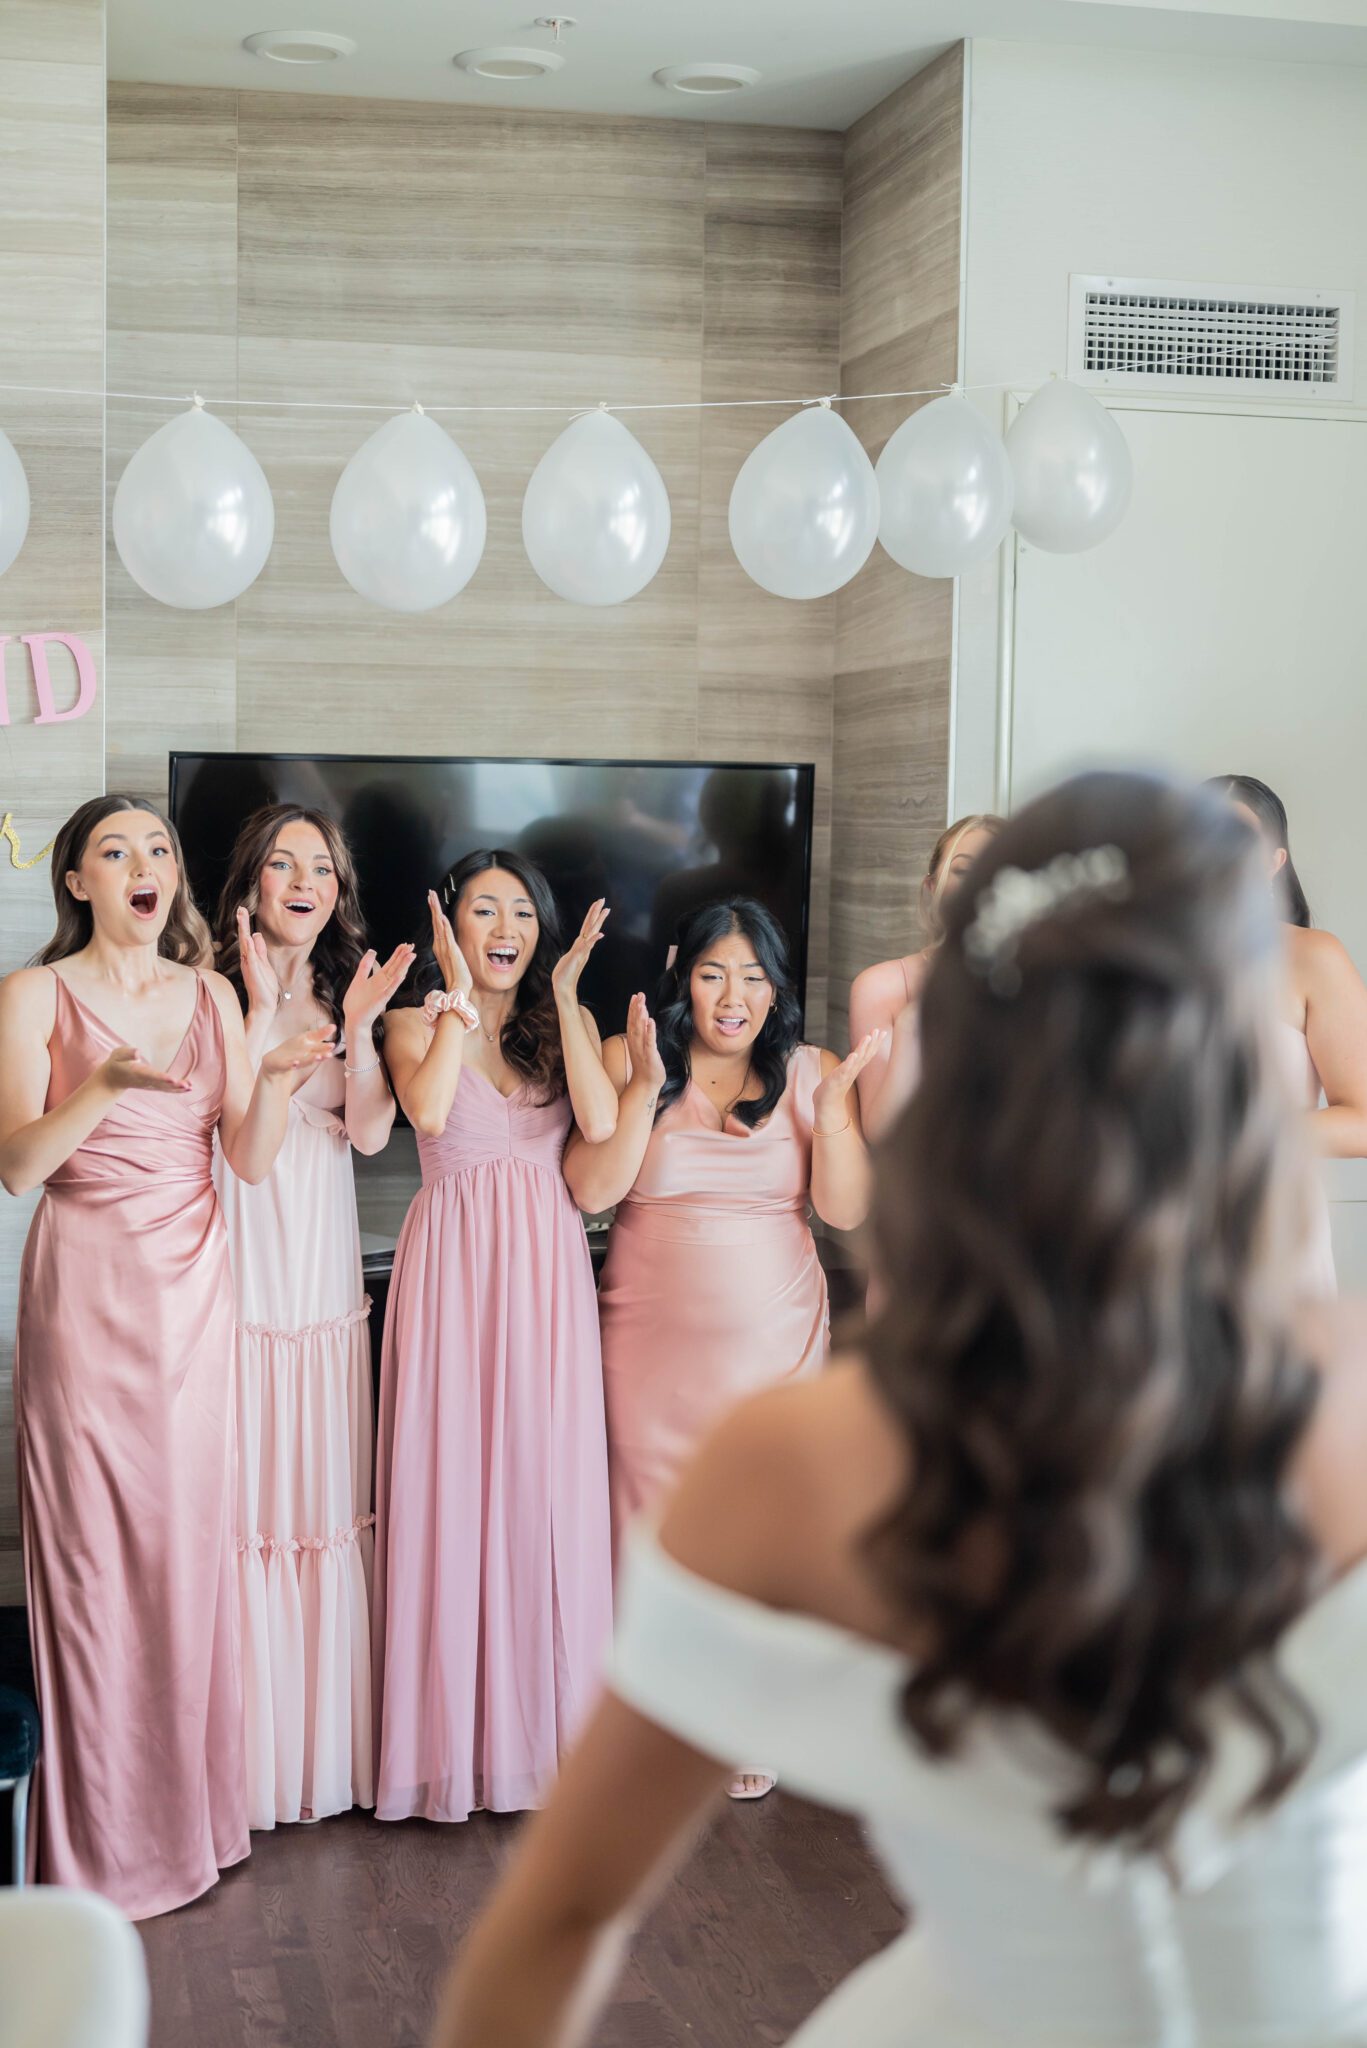 Bridesmaid first look reaction to bride in her elegant gown, bridesmaids in different shades of pink gowns, in getting ready suite.